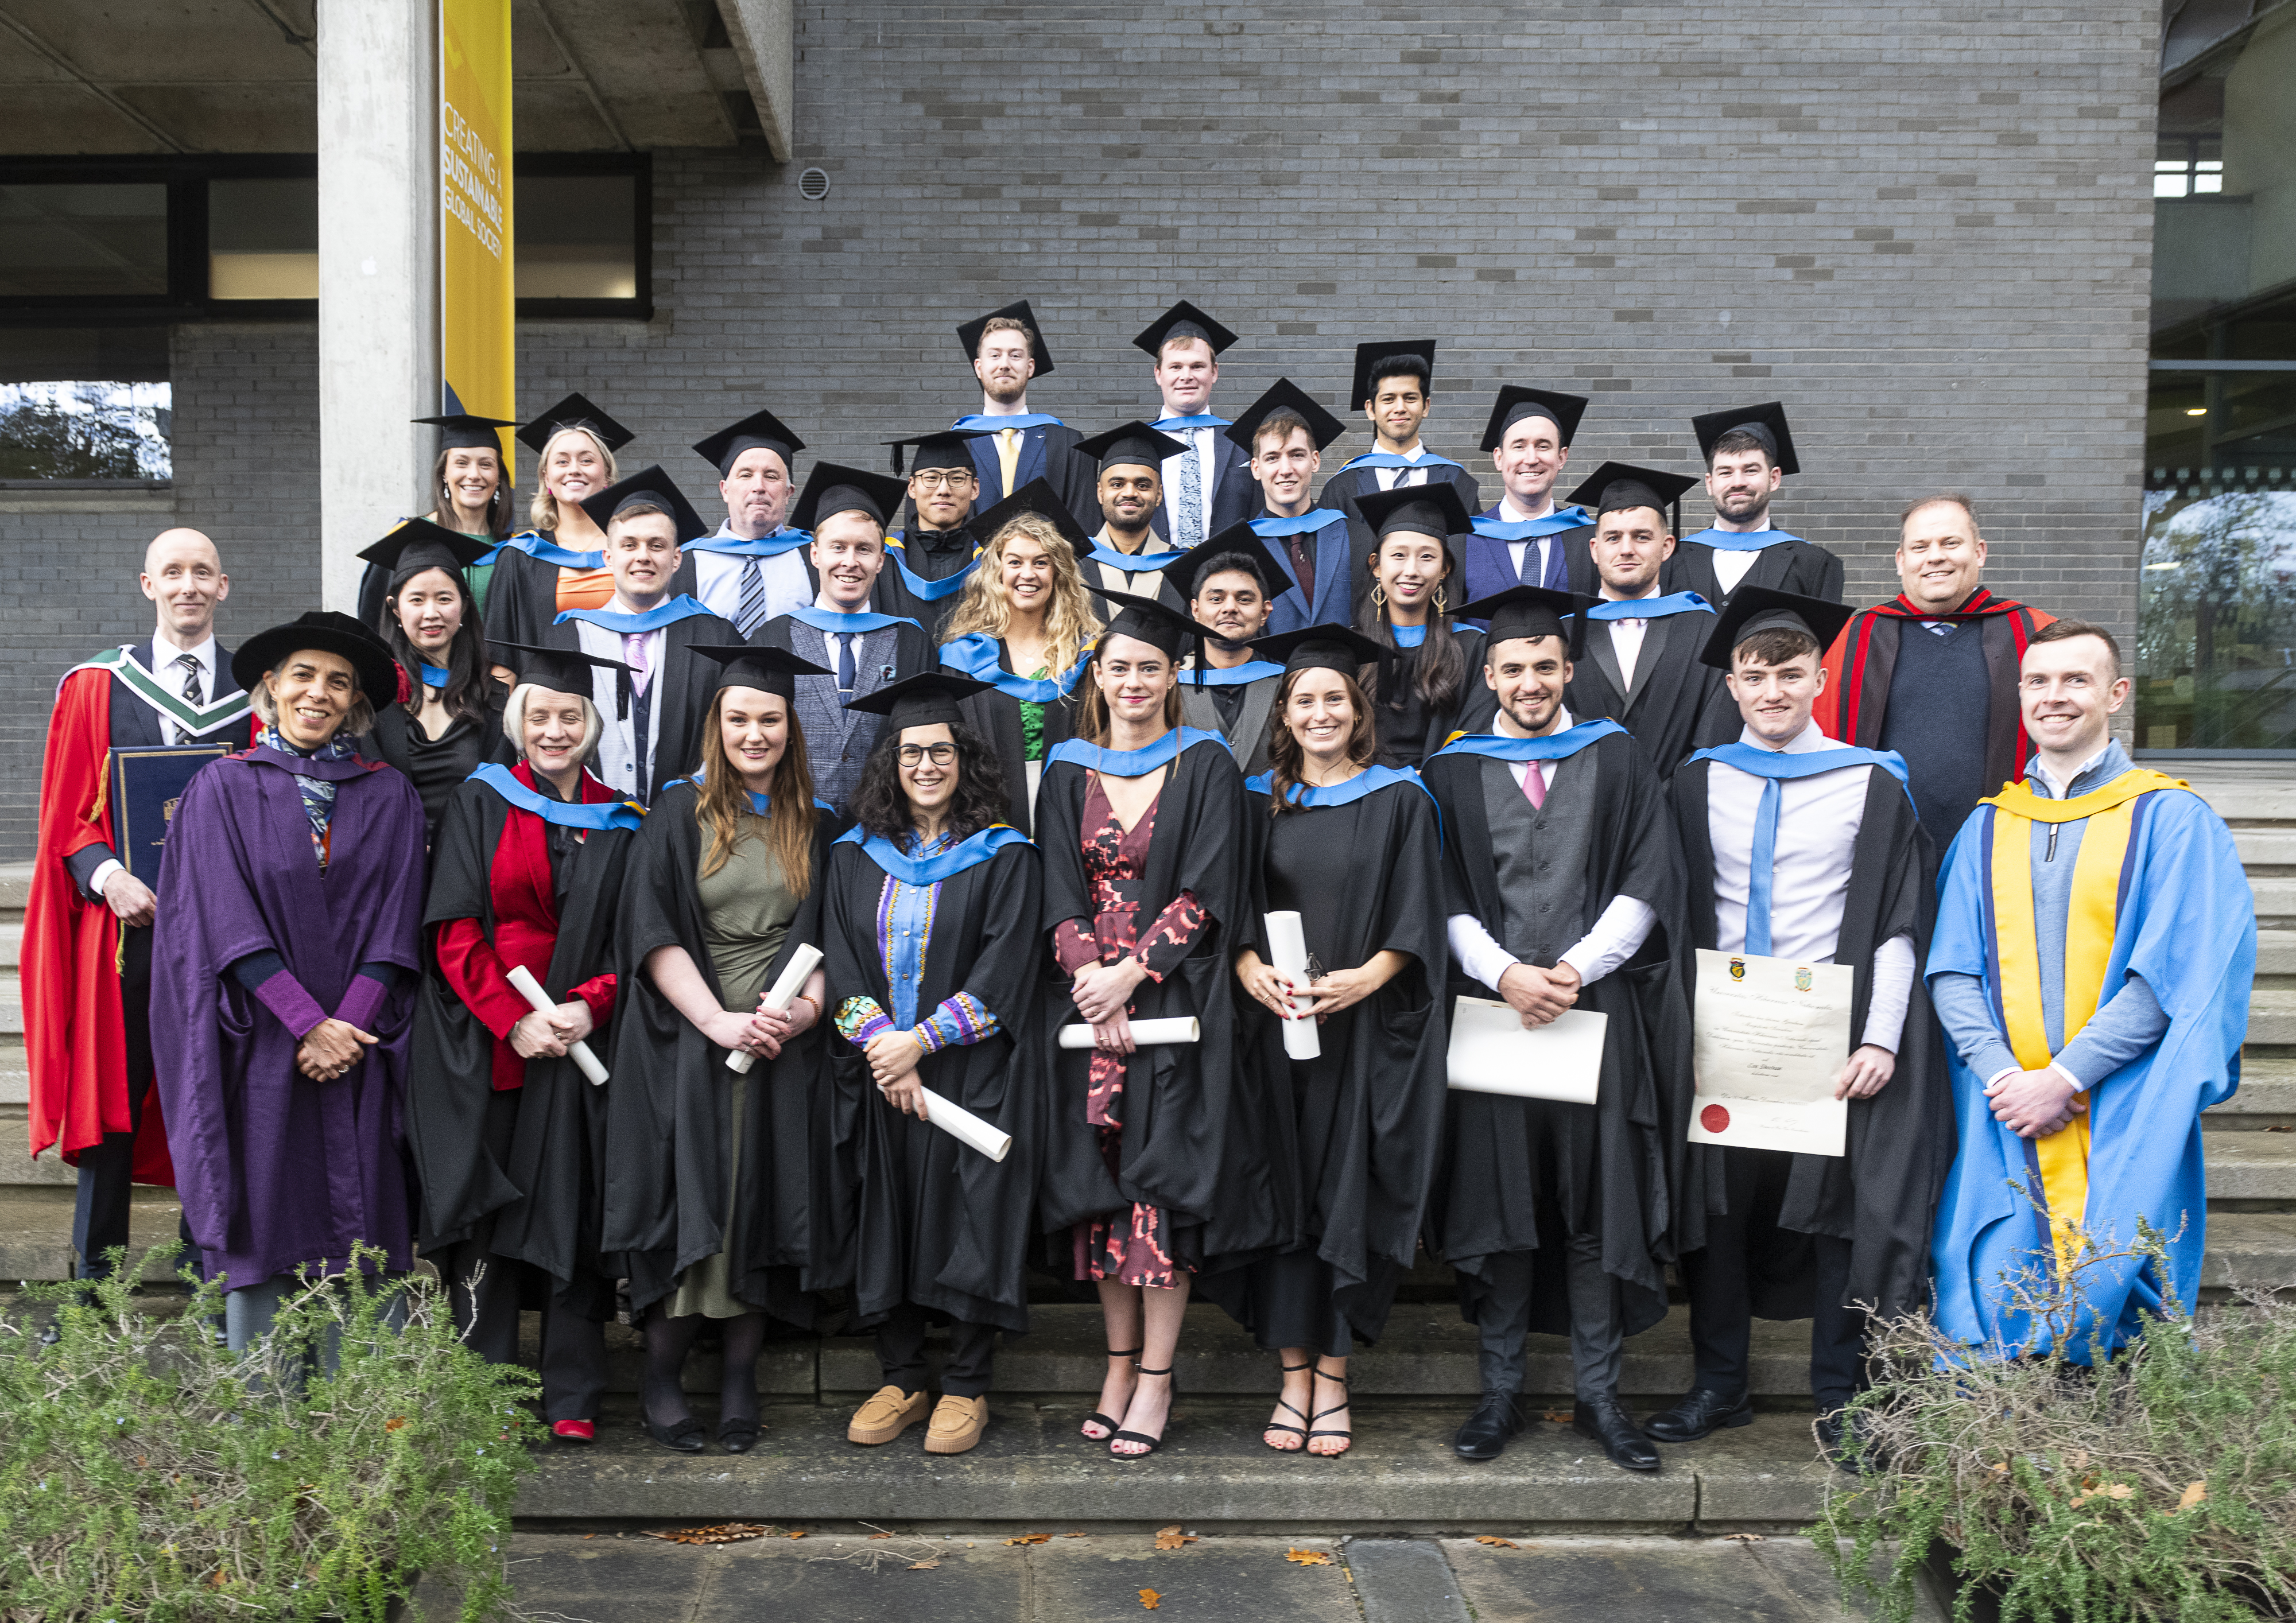 Students in academic dress after their conferring ceremony